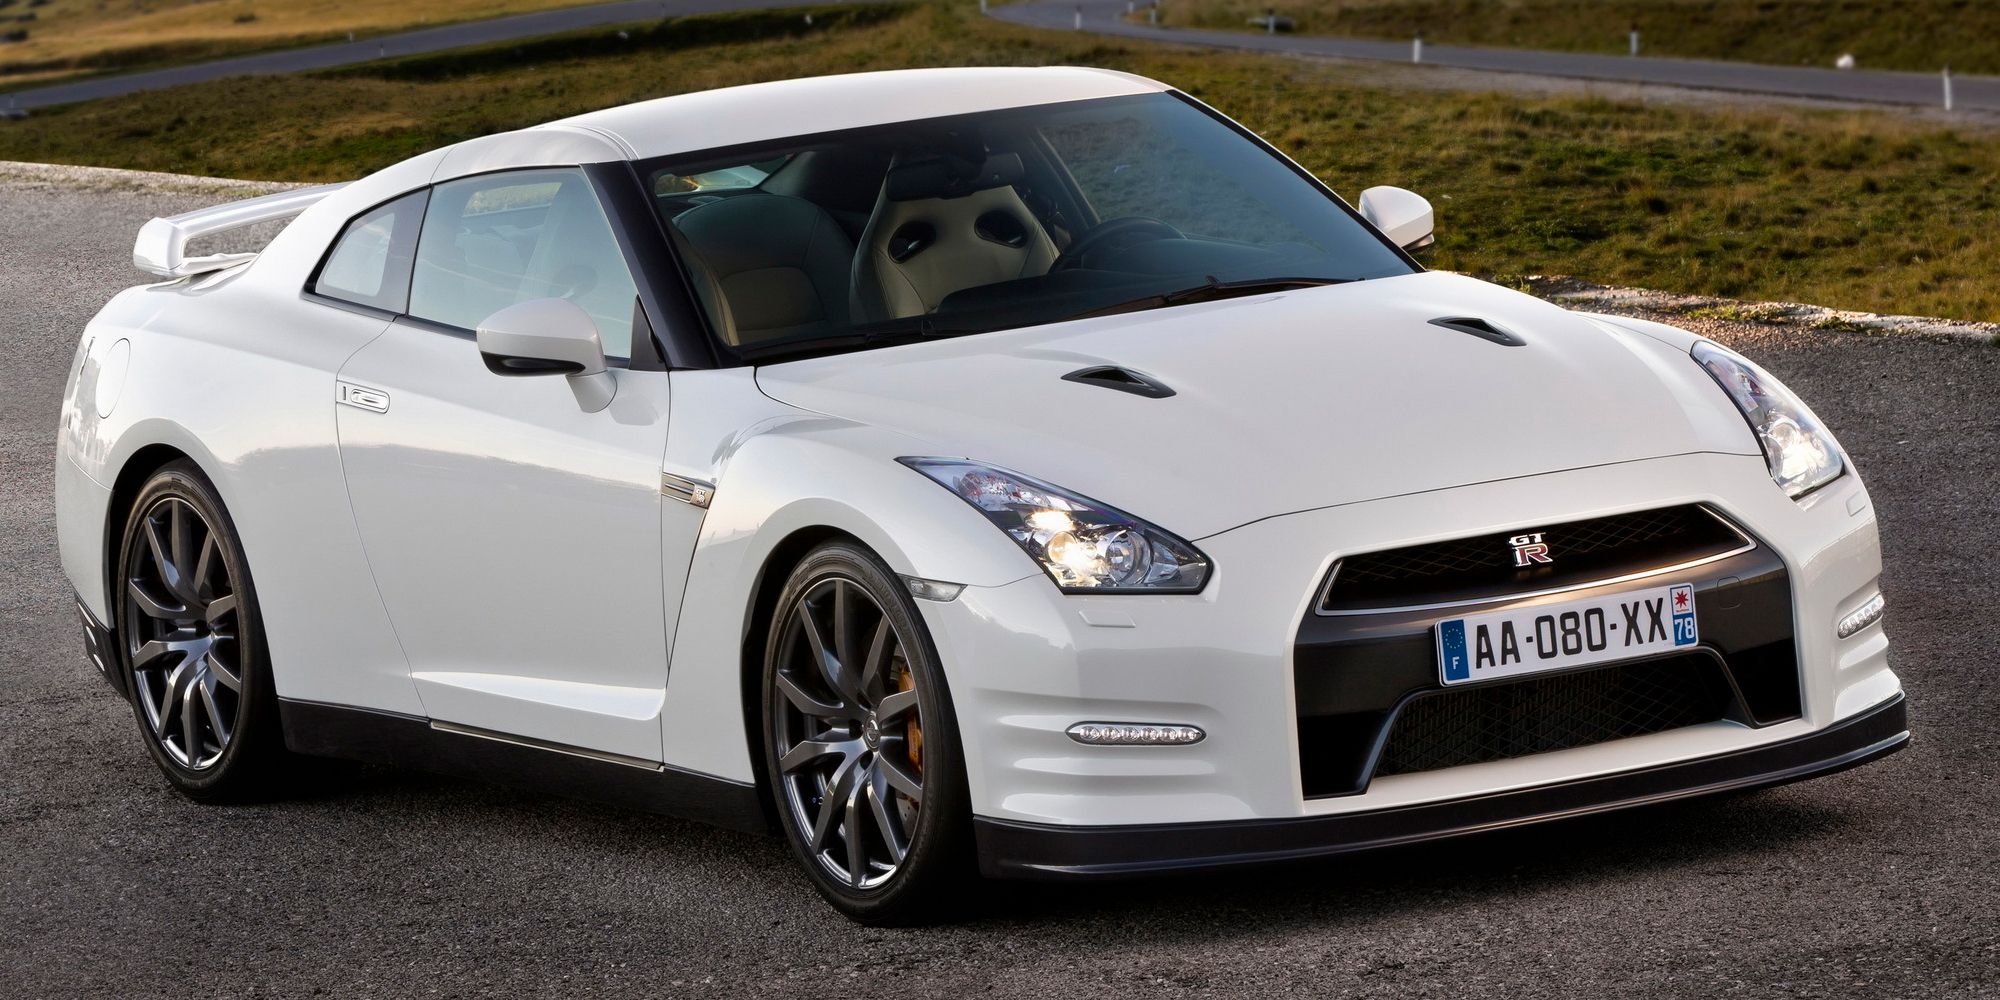 Front 3/4 view of a white R35 GTR Black Edition